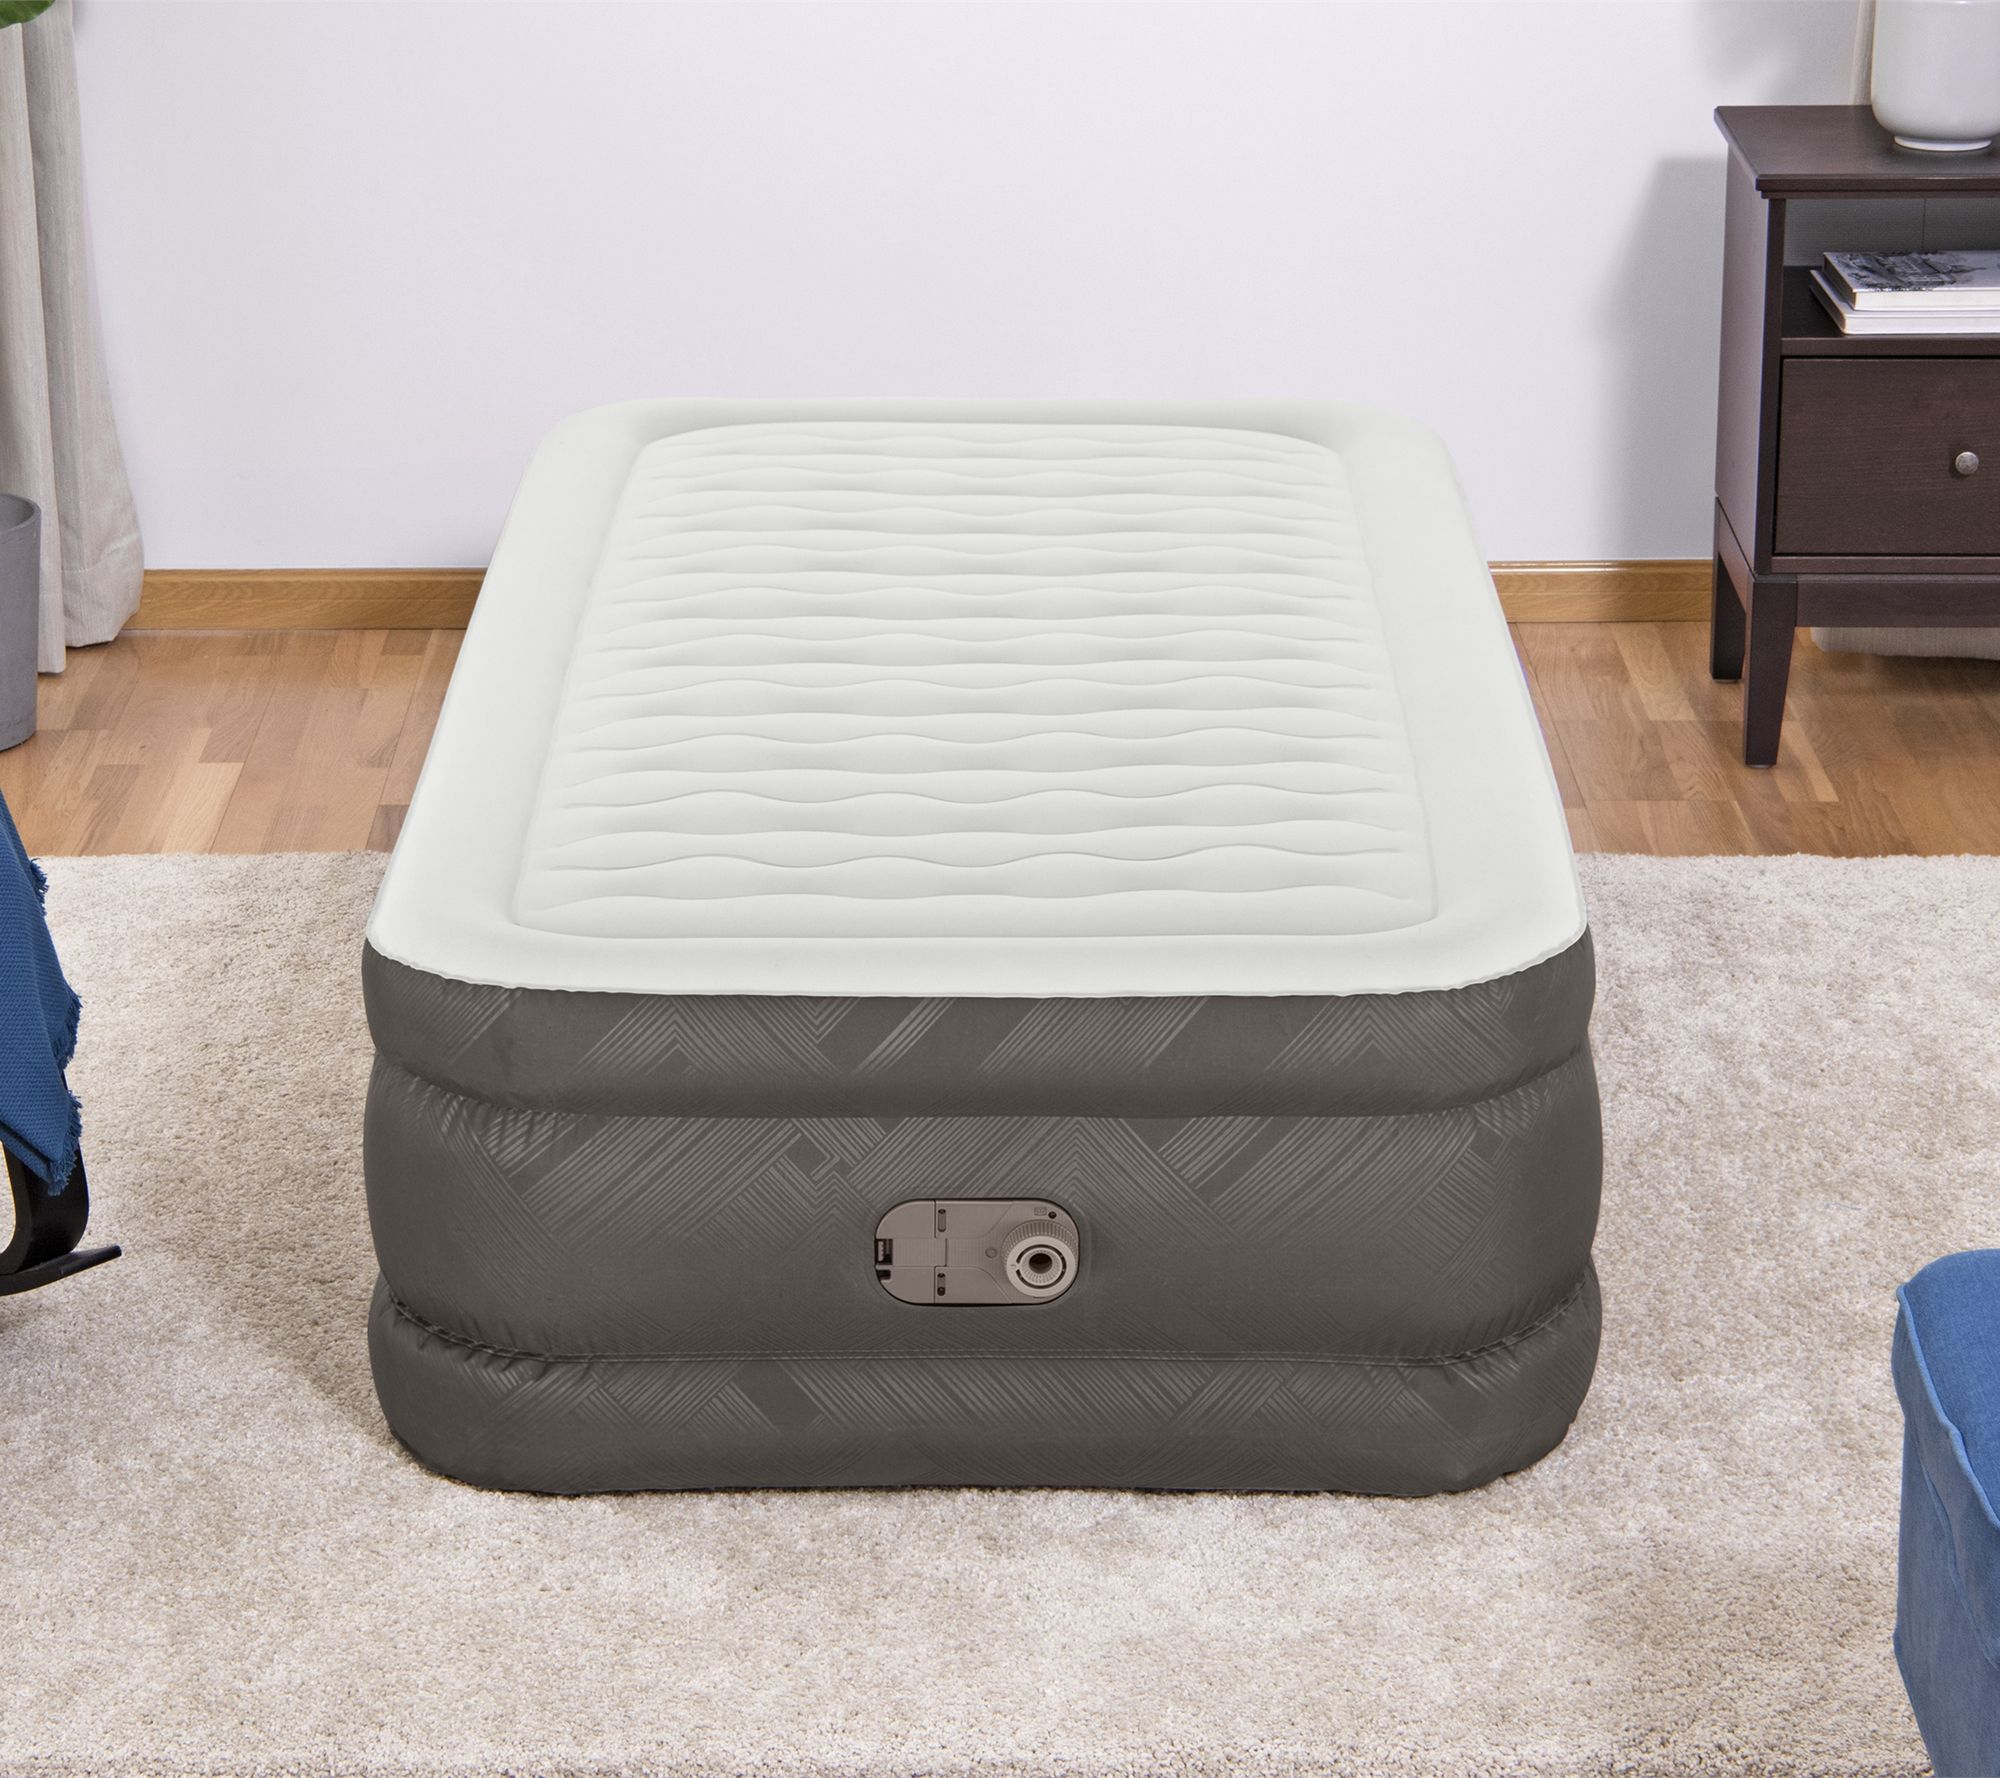 NXONE Air Mattress,18 inch Inflatable Airbed Luxury Double High Self I